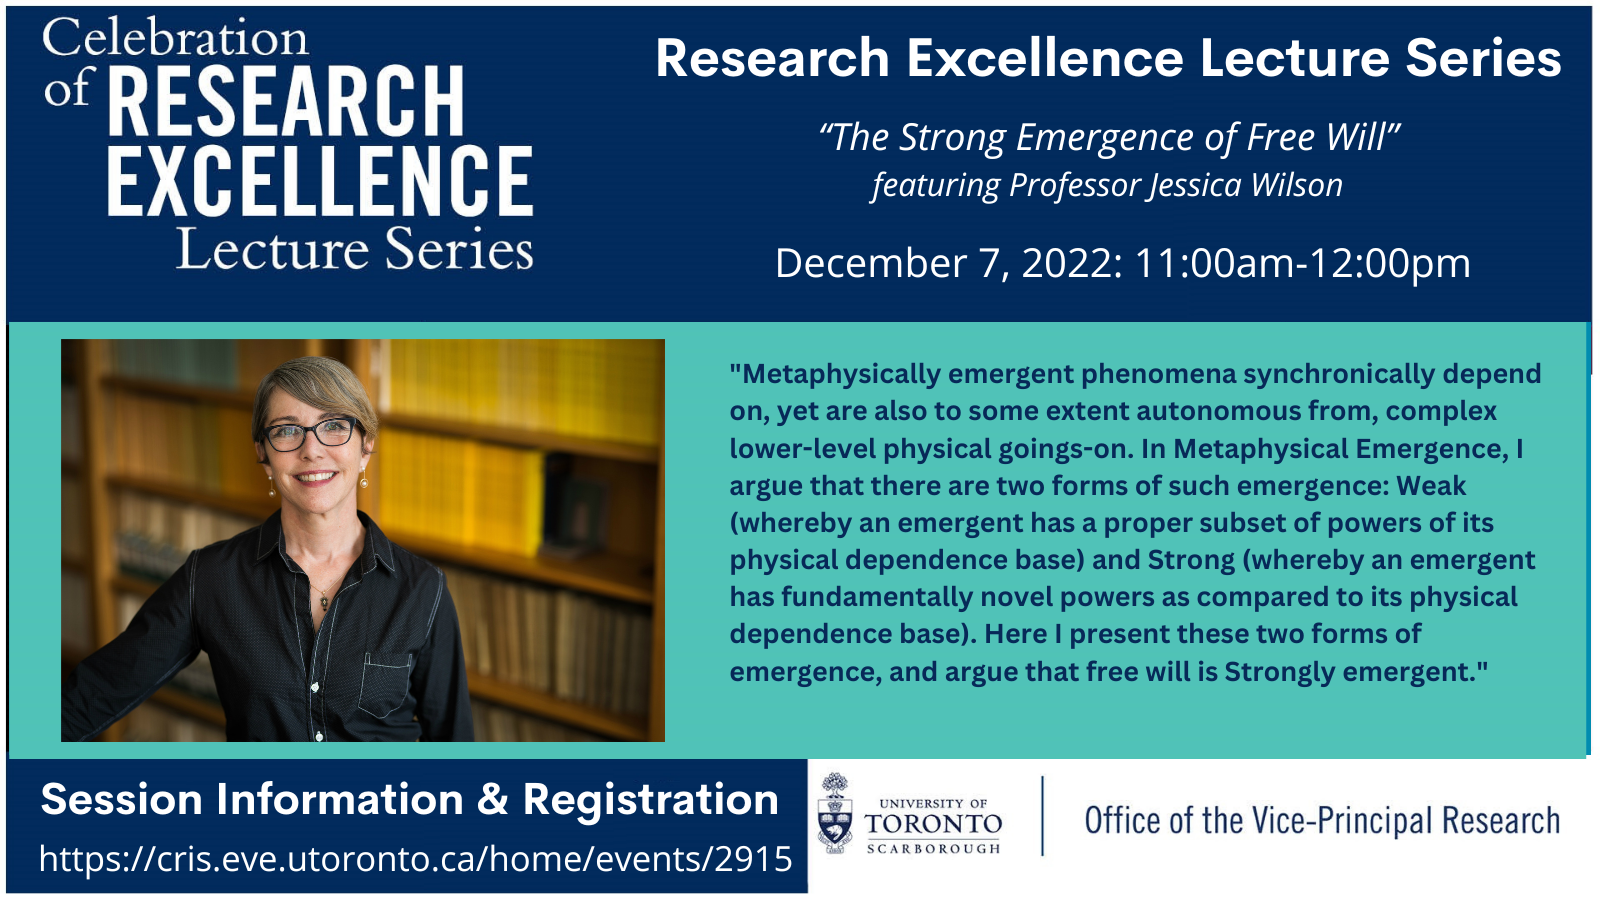 Research Excellence Talk with Professor Jessica Wilson